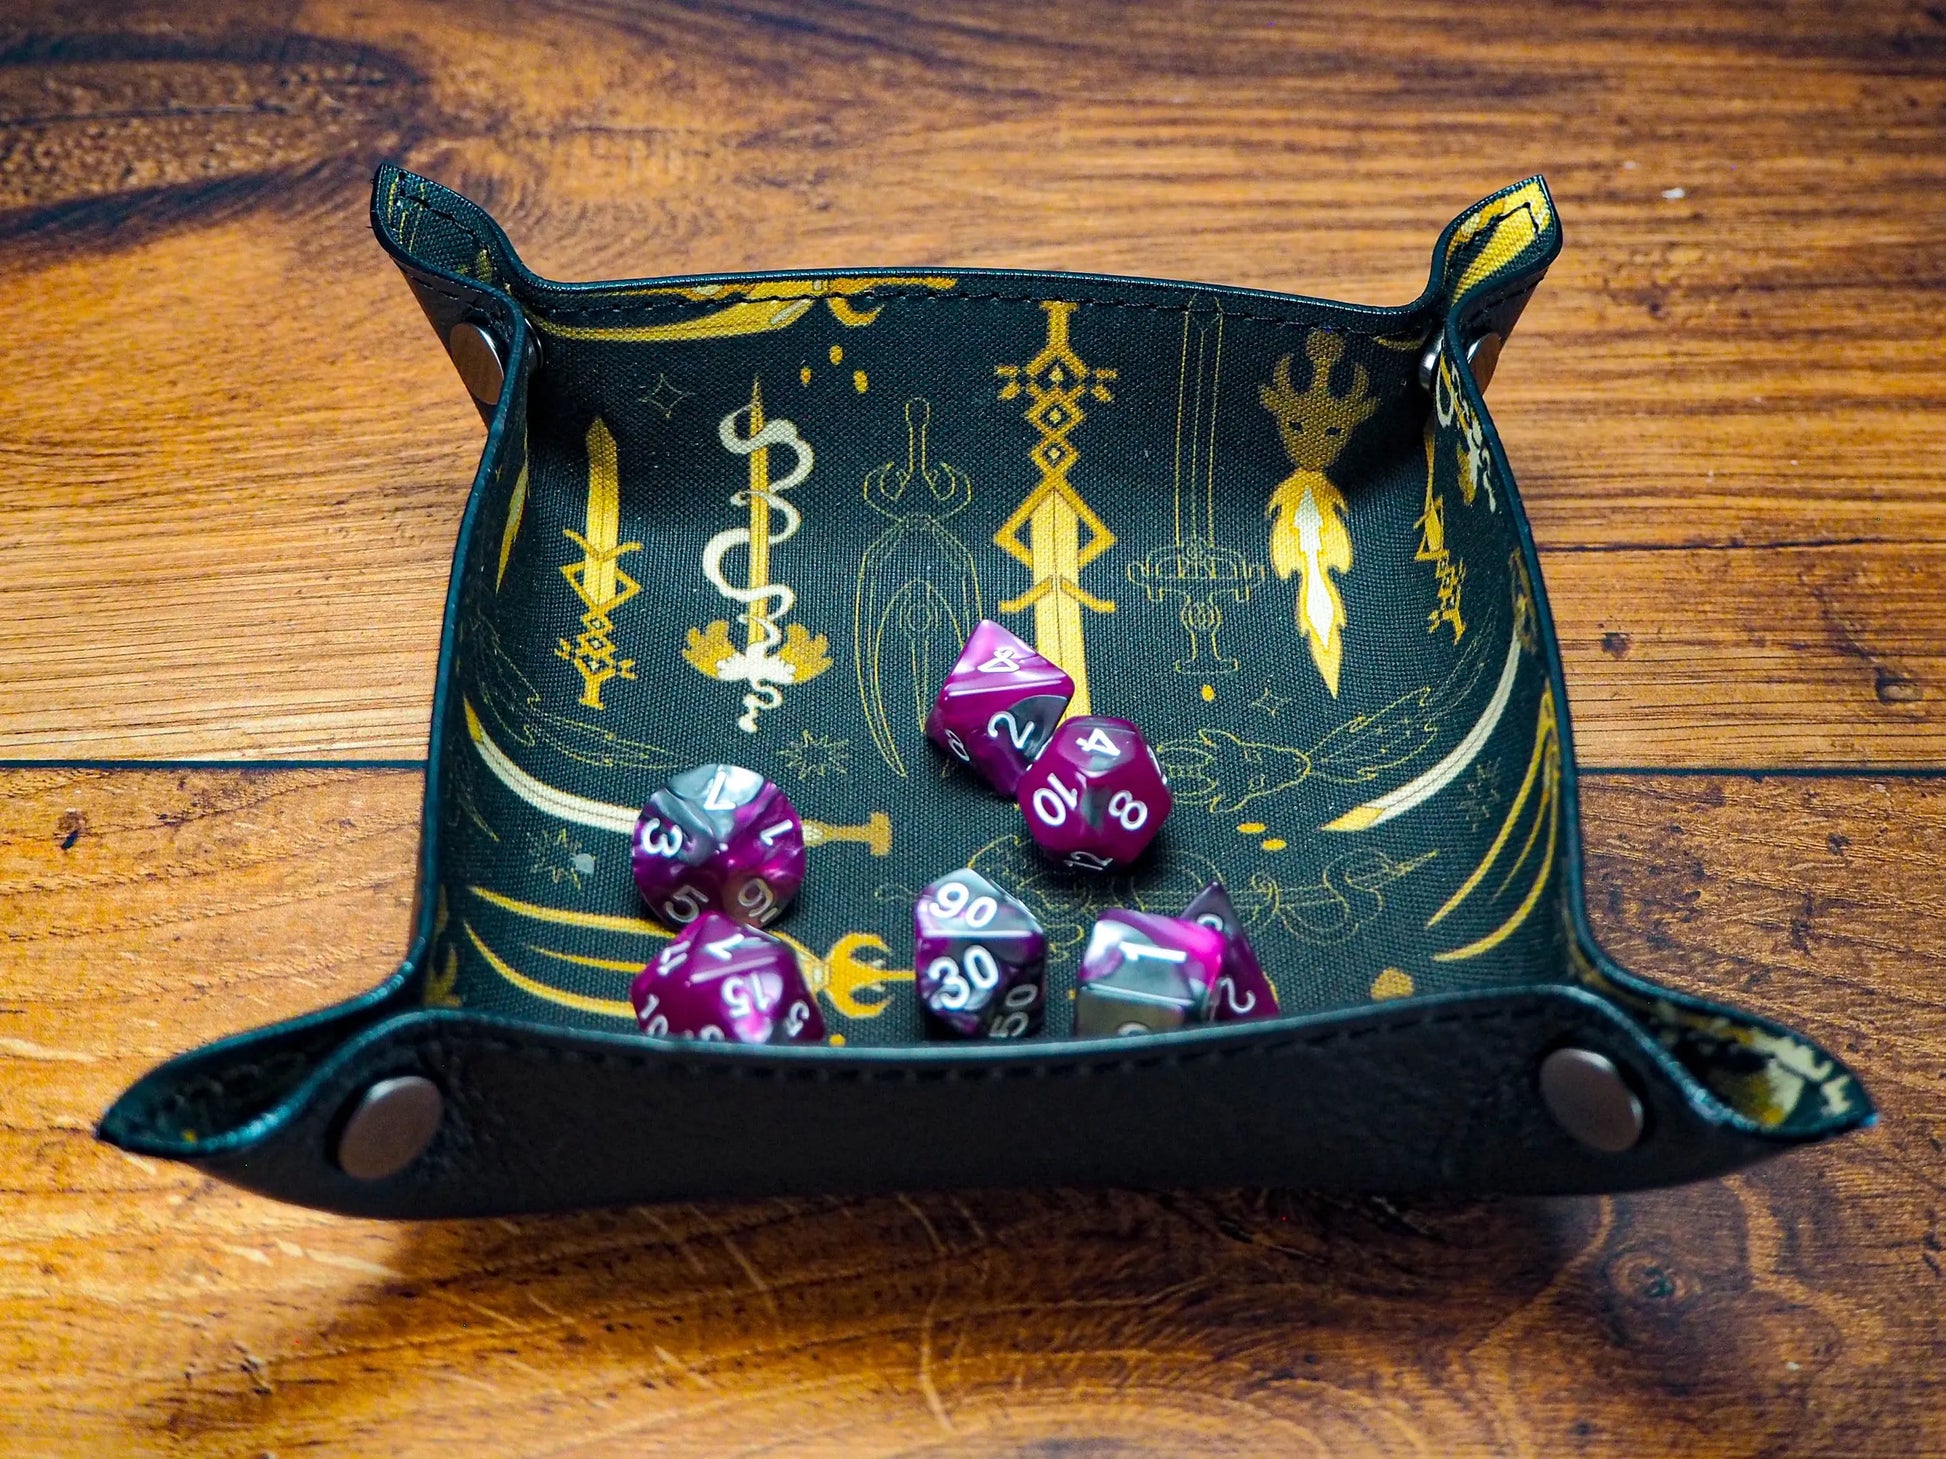 Swords Canvas Dice and Leather Dice Tray - Collapsible Leather Dice Tray a fantastic DnD Gift for Role Playing Games EmBrace Leather